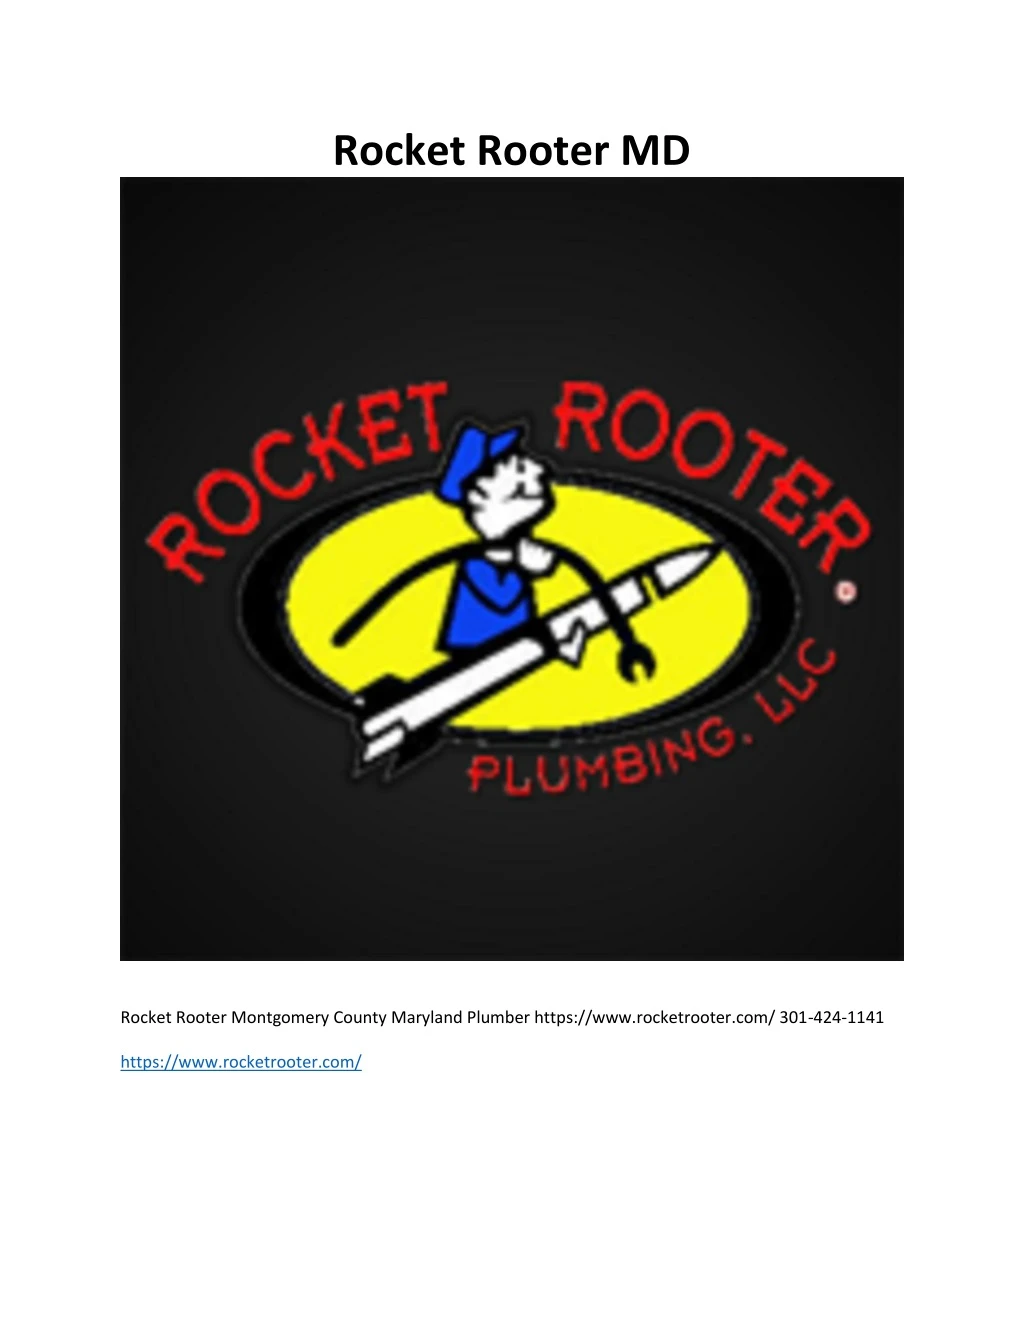 rocket rooter md